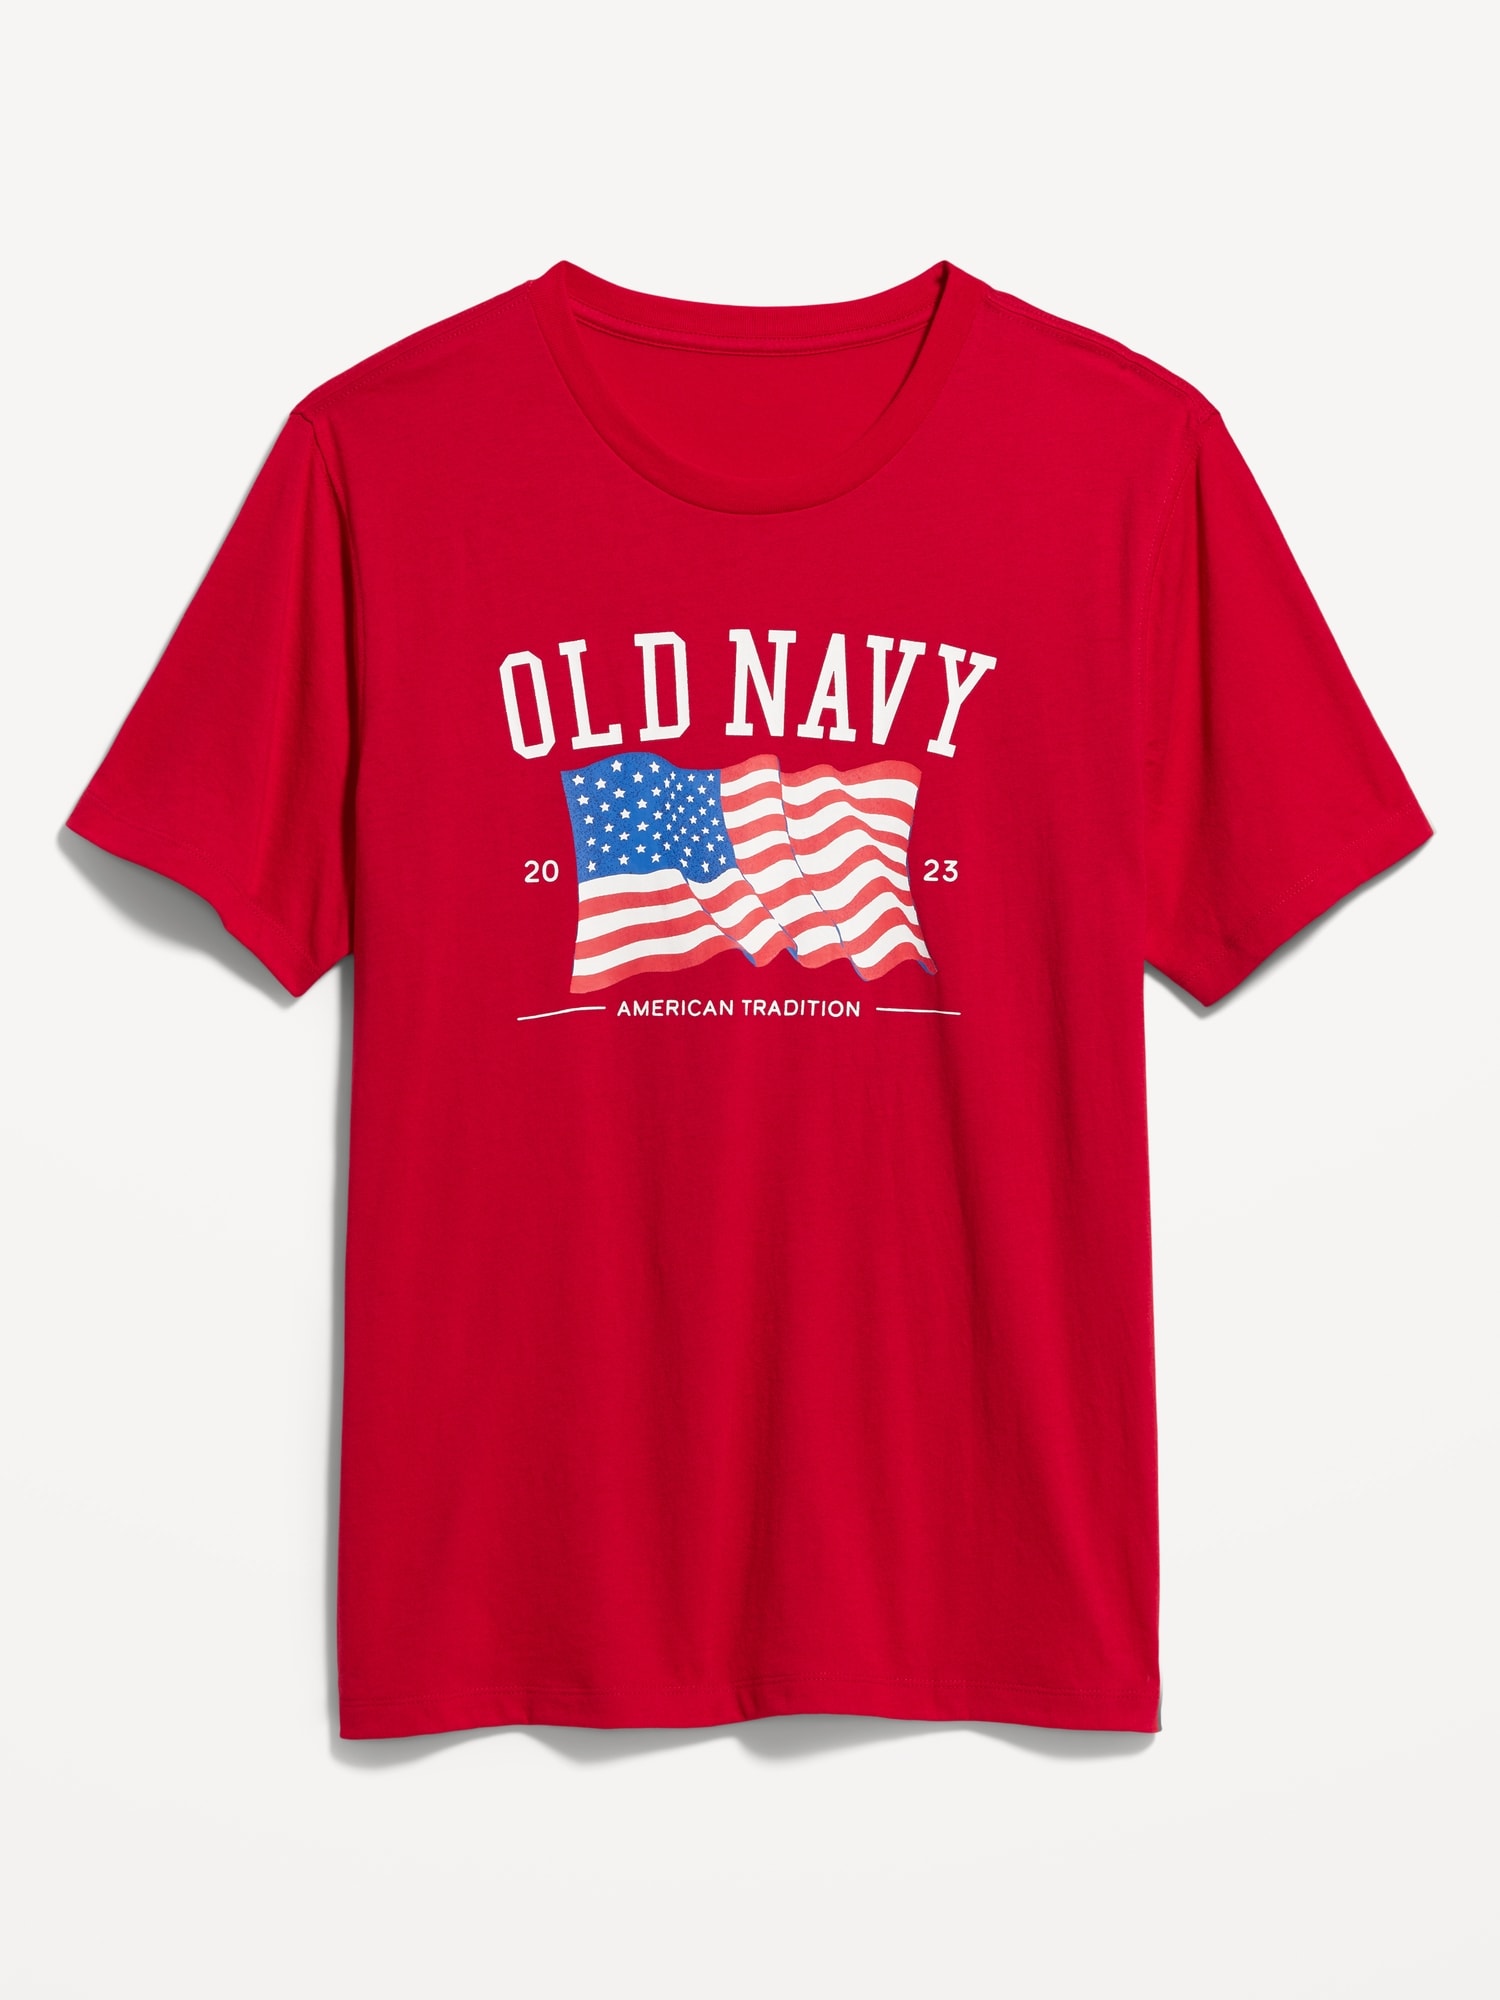 Matching Old Navy Flag Graphic T-Shirt for Men